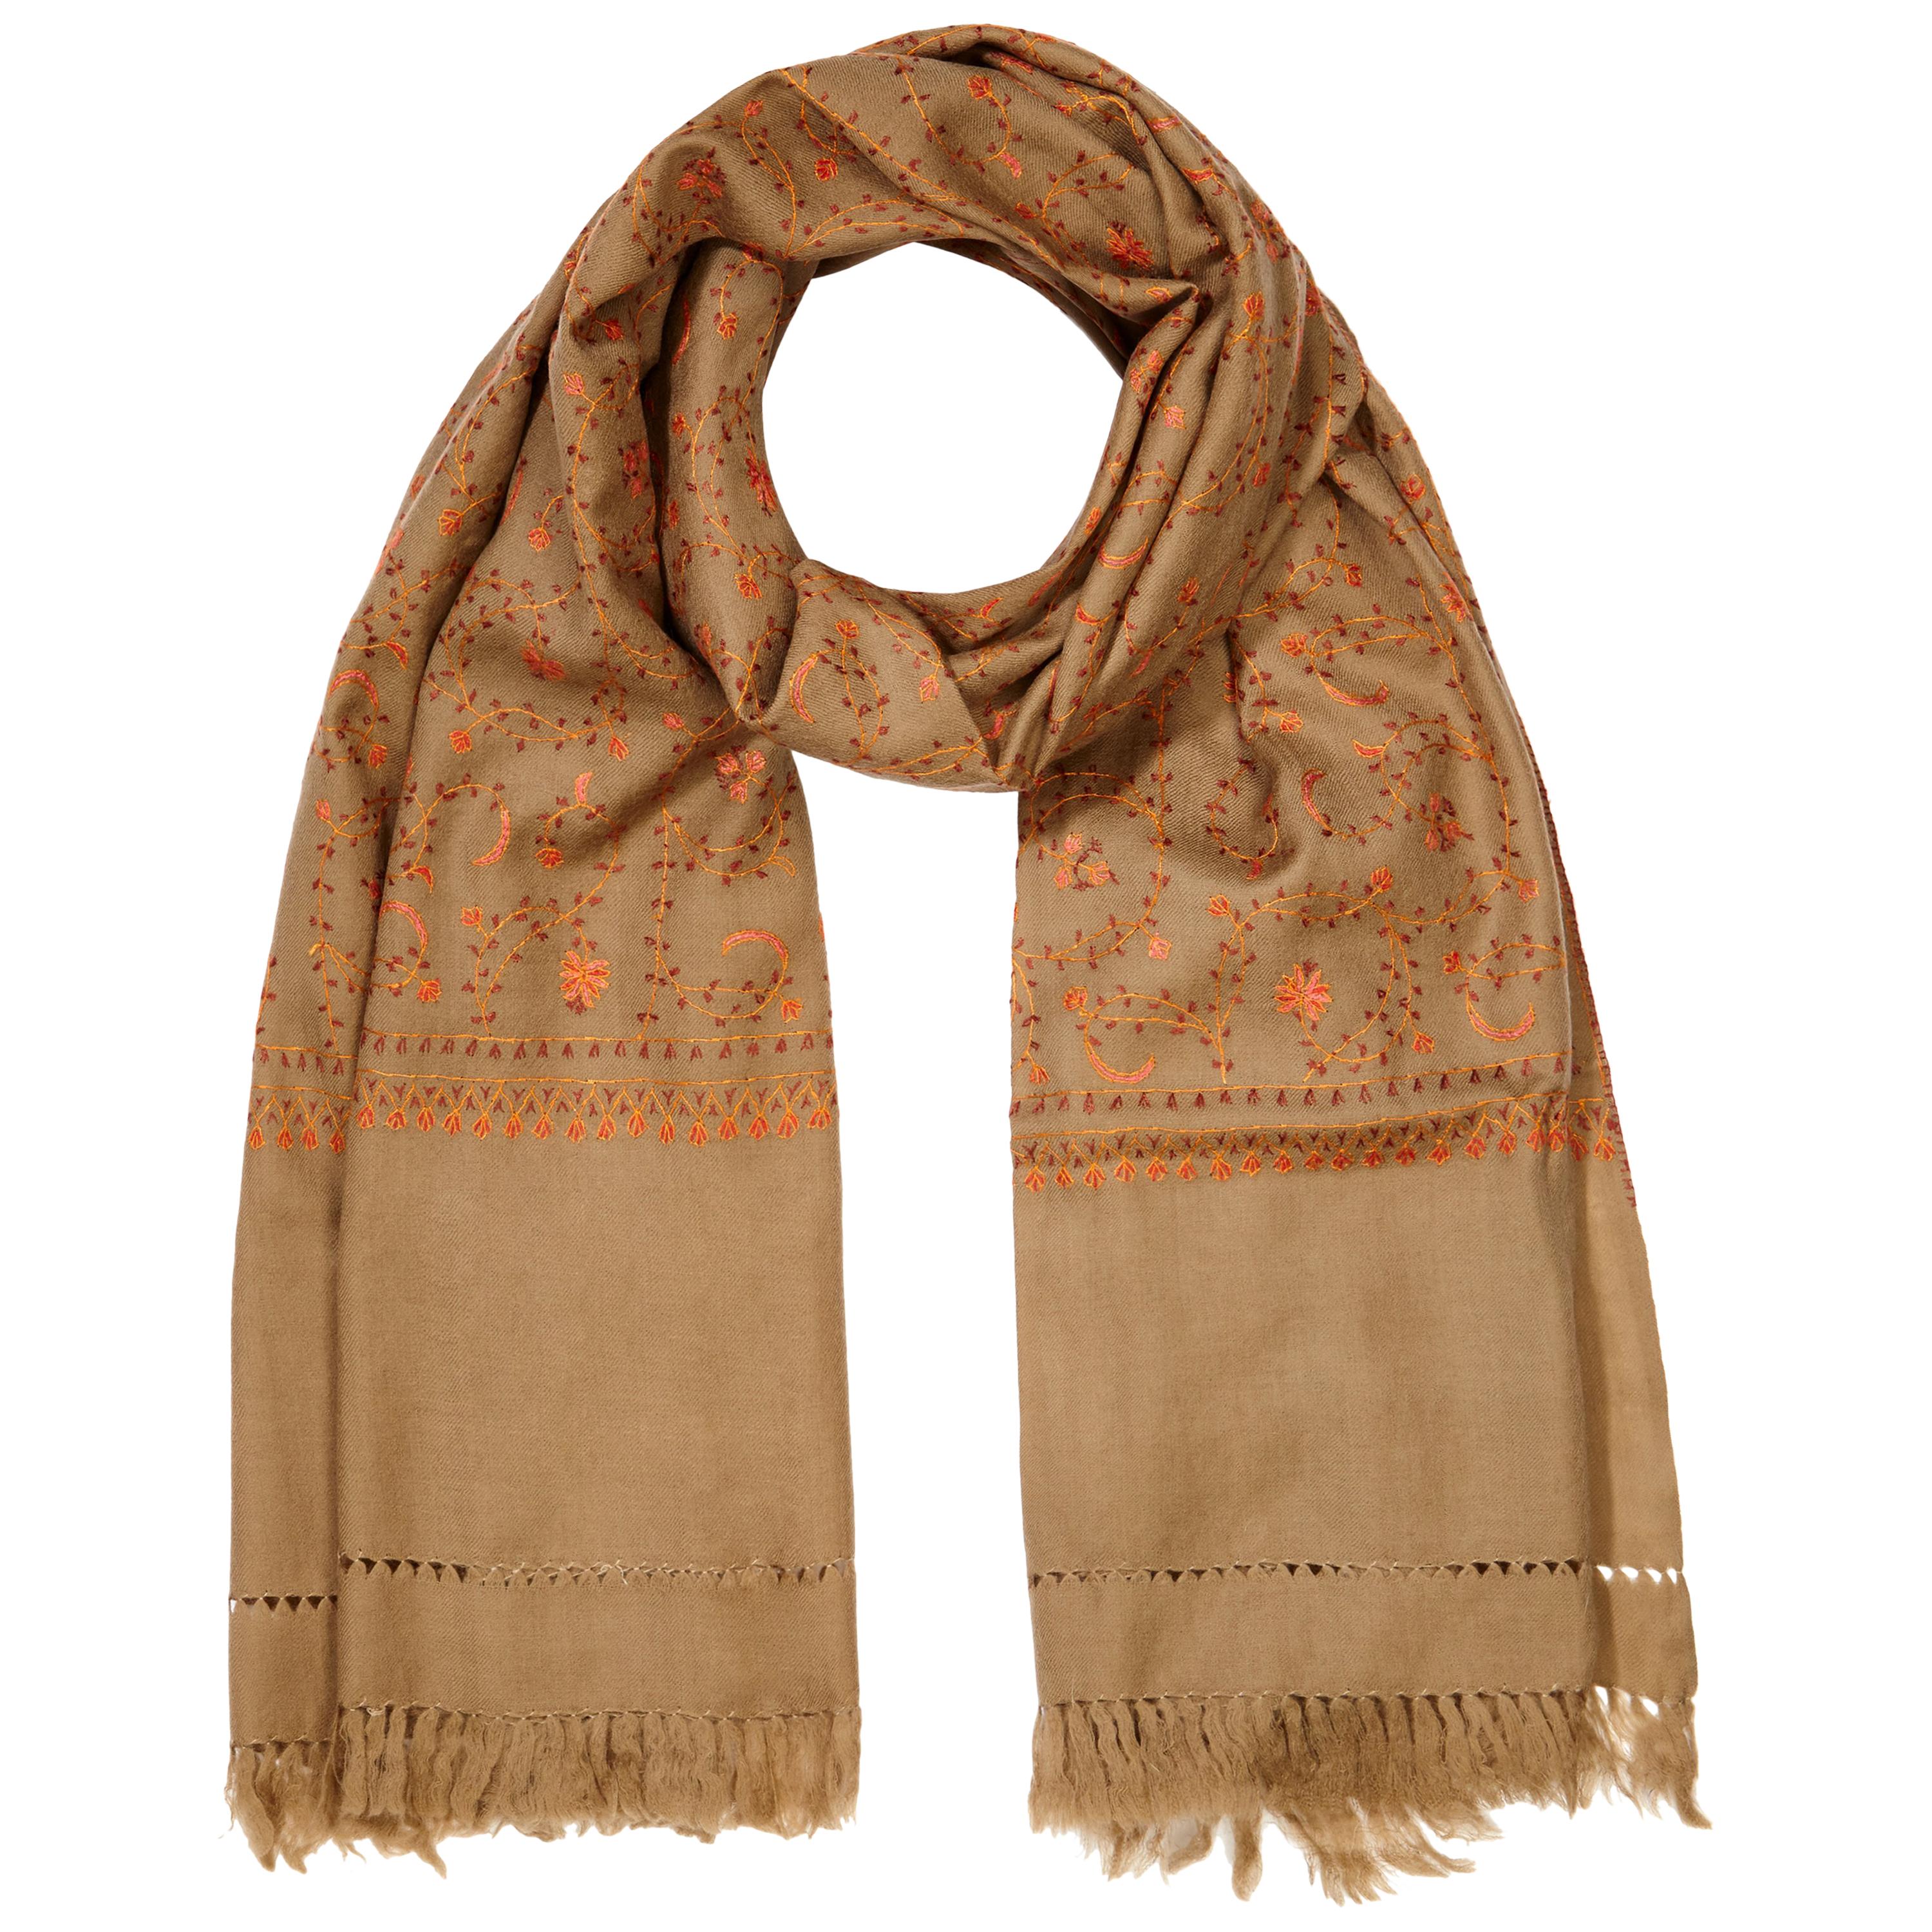 Hand Embroidered Cashmere Shawl in Tan Brown Made in Kashmir - Gift